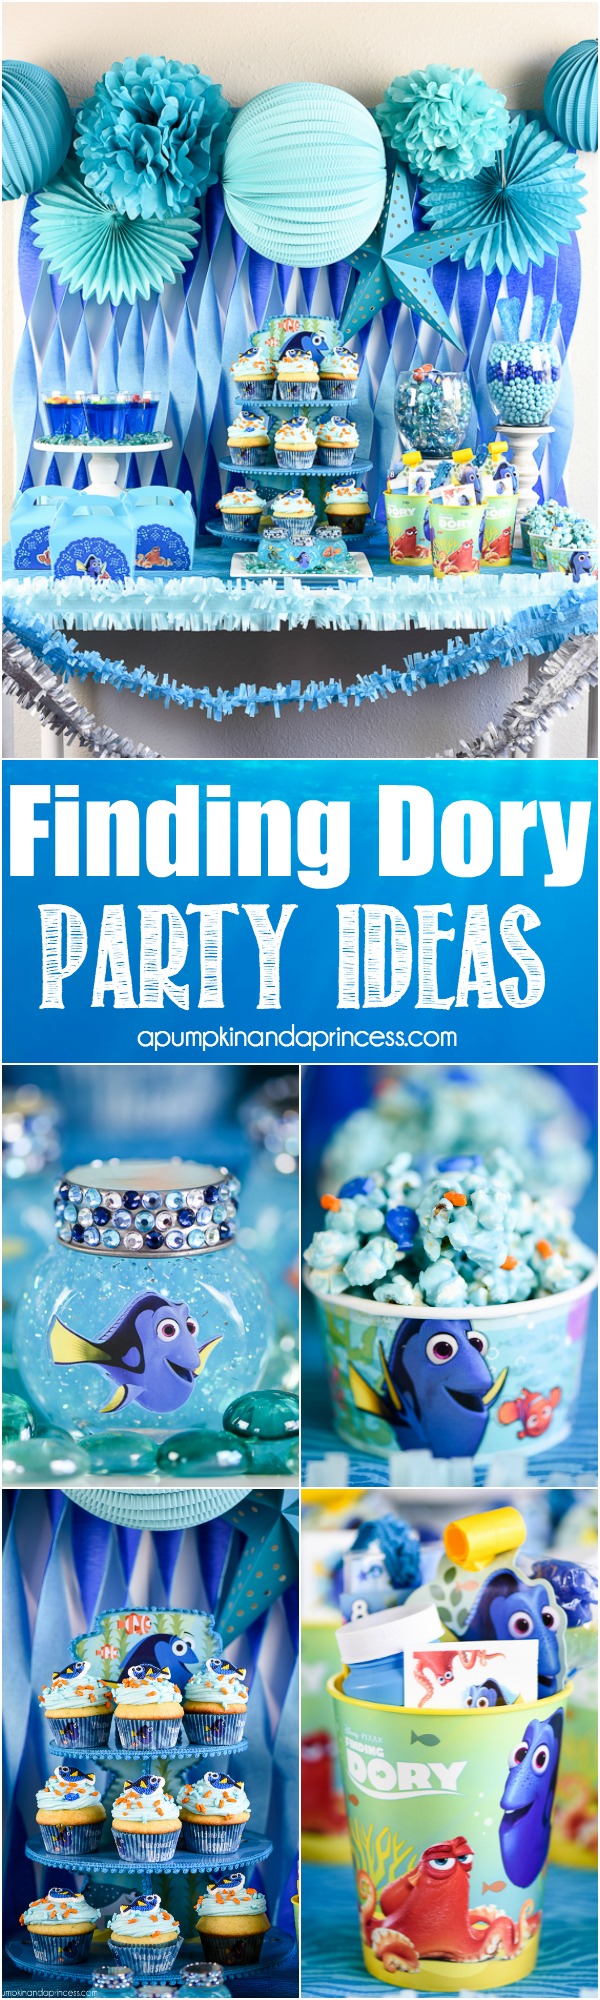 Finding Dory Party Ideas – easy DIY Finding Dory treats, party favors, and decorations.